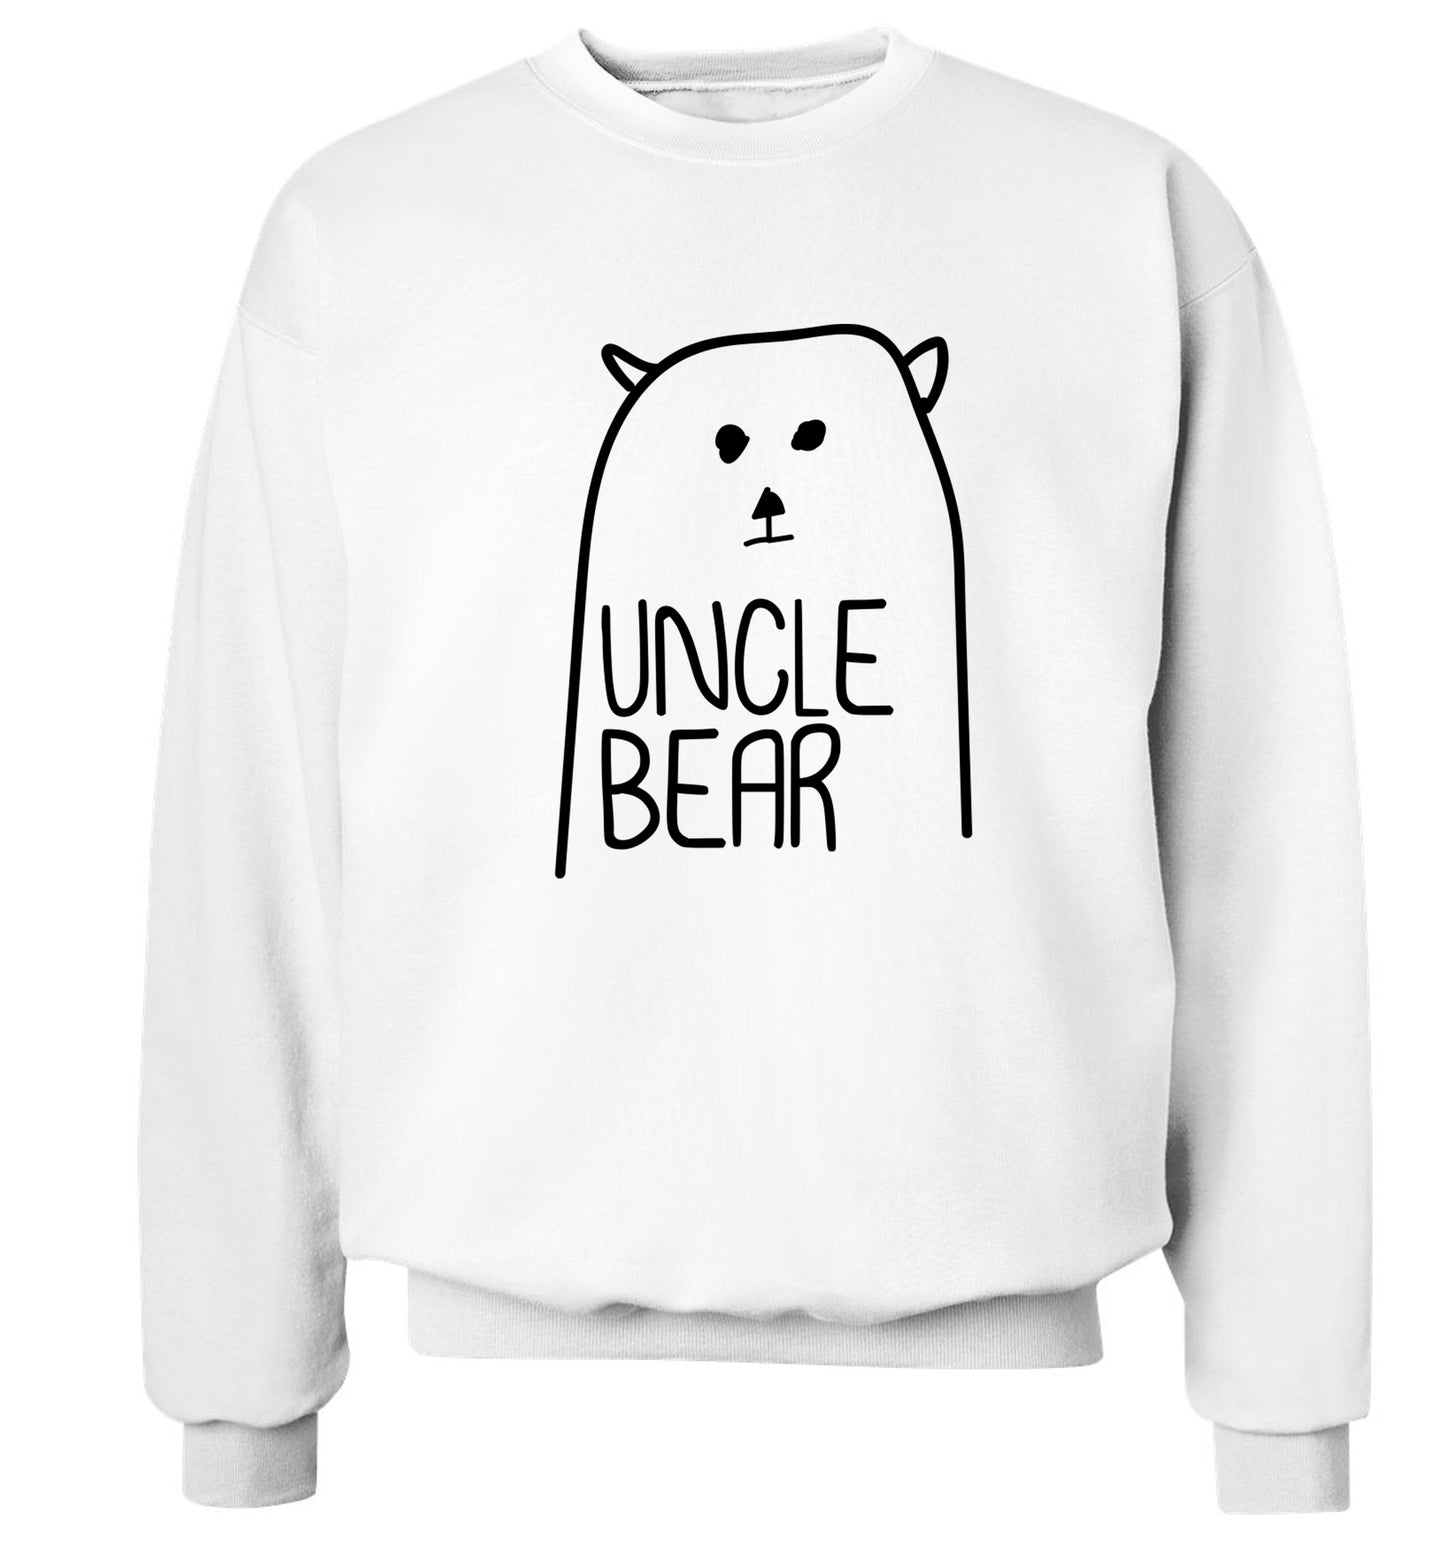 Uncle bear Adult's unisex white Sweater 2XL